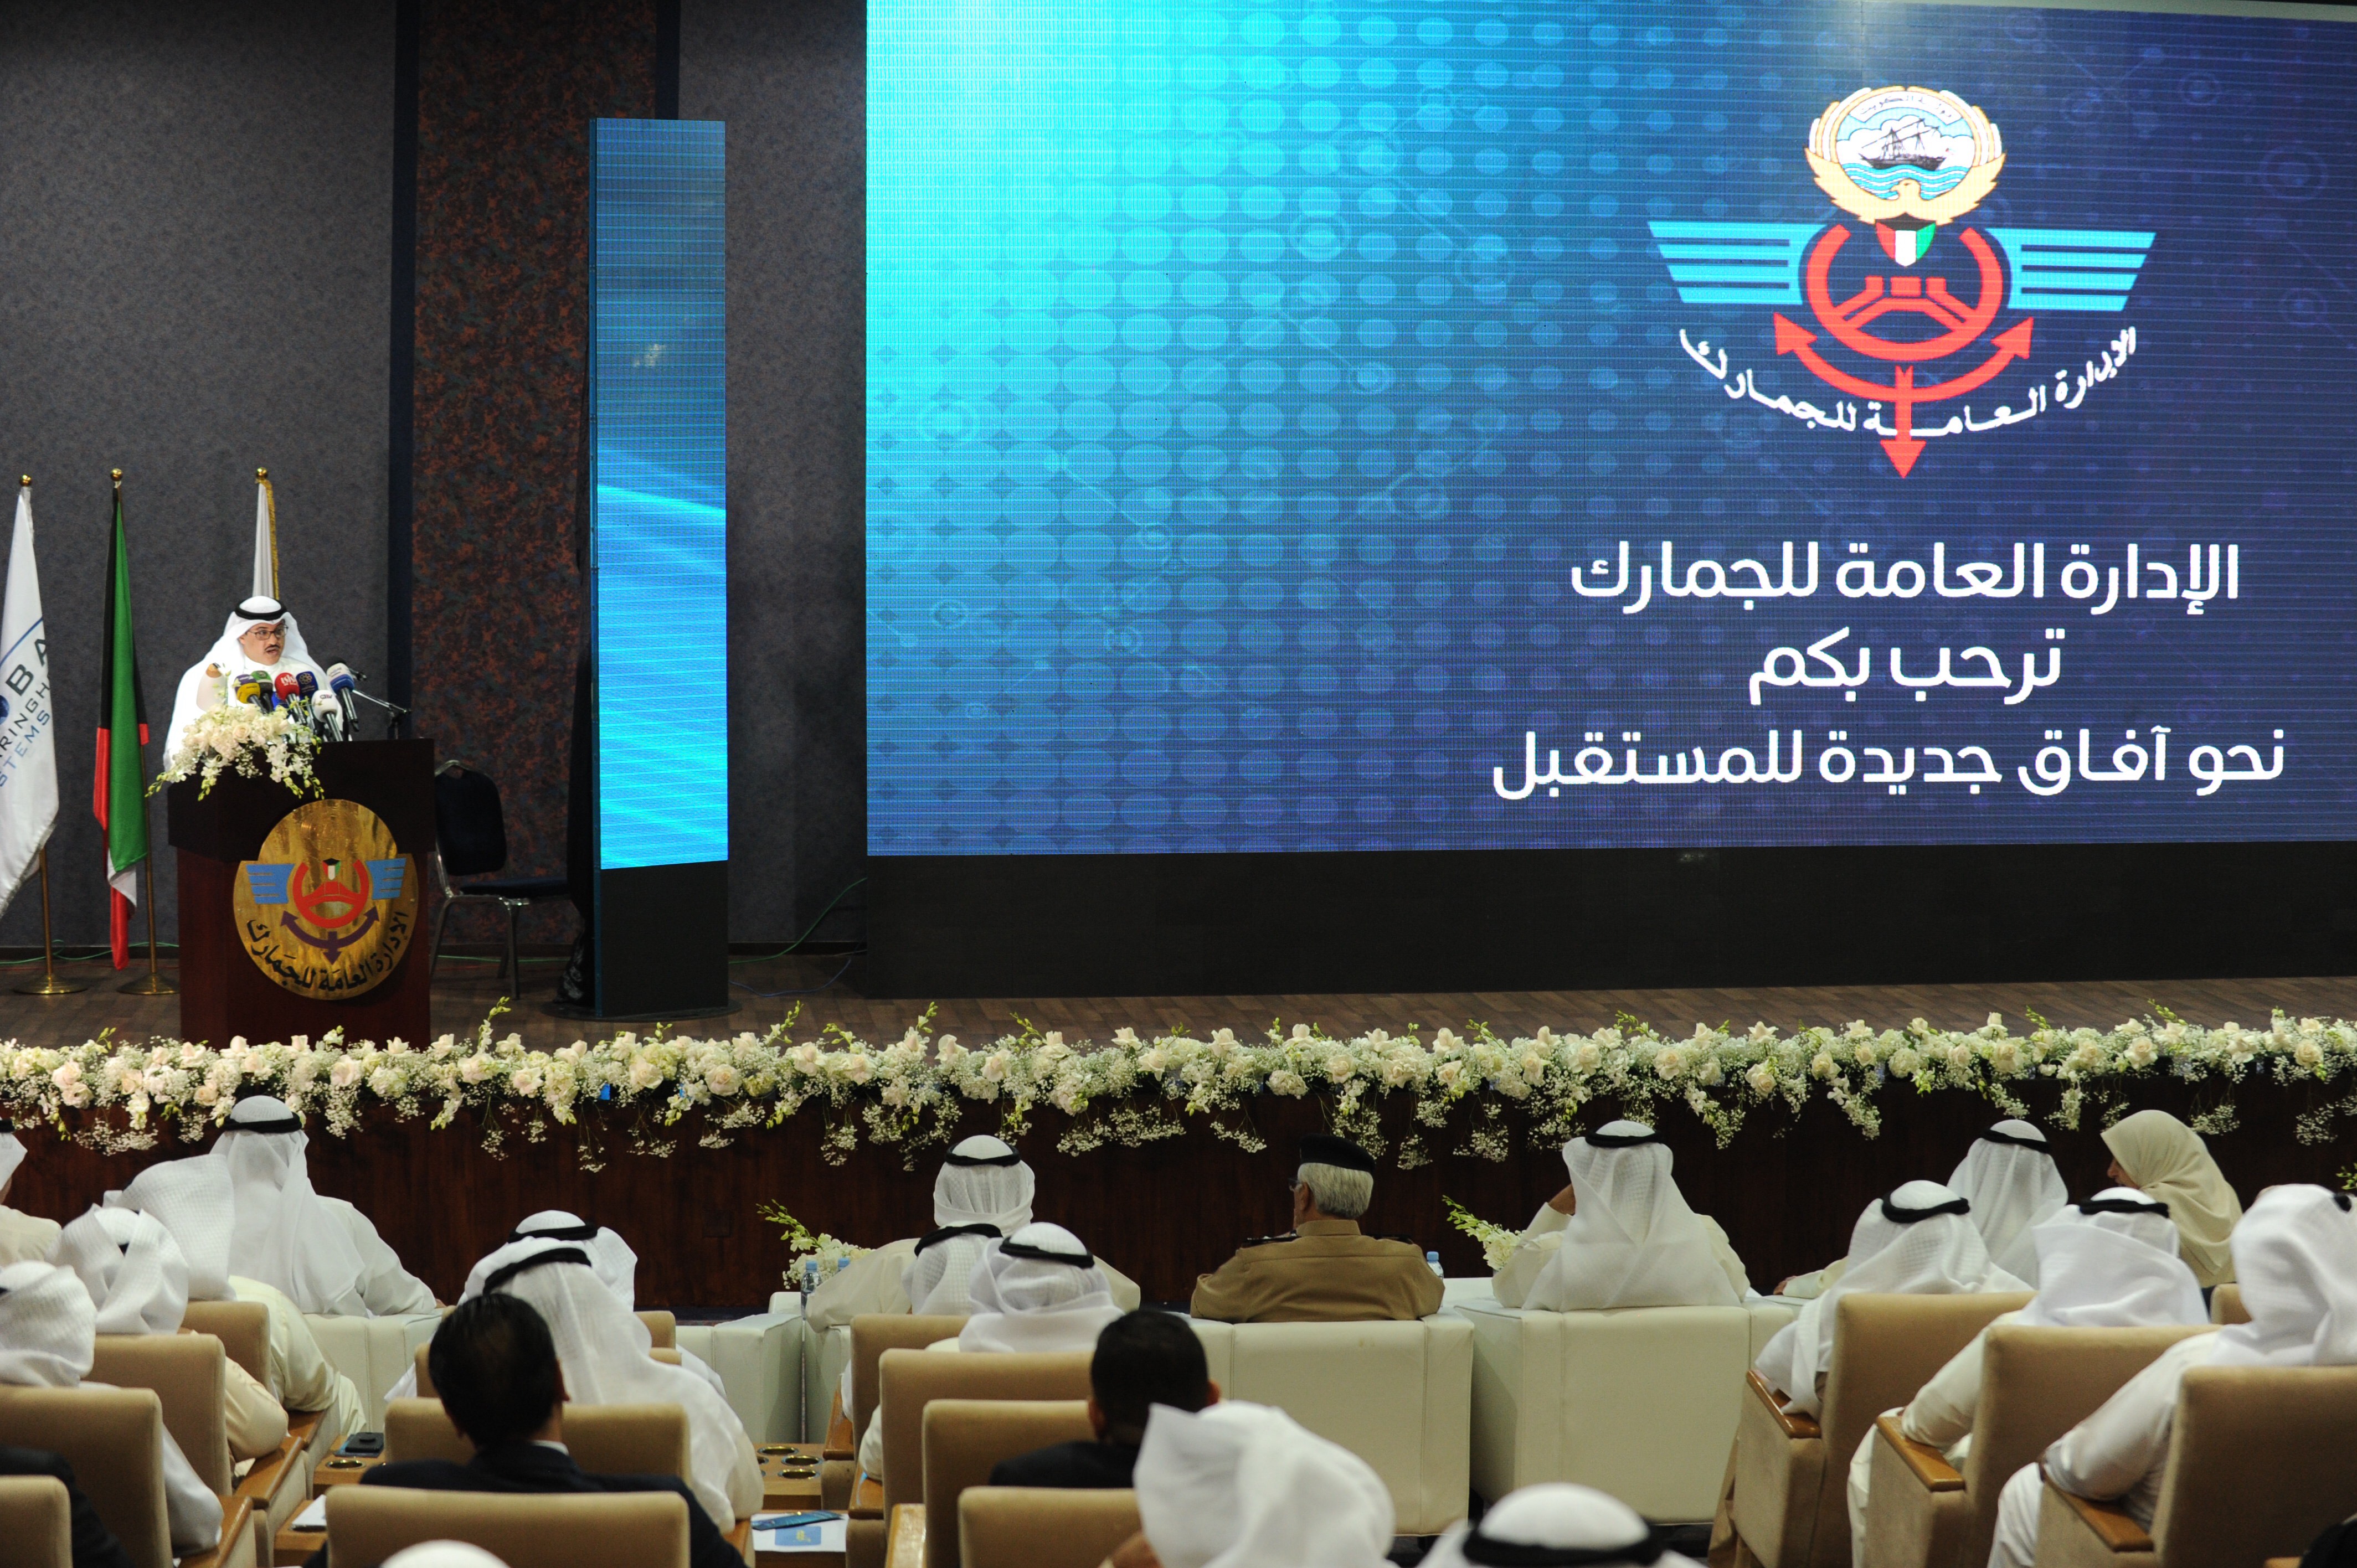 Kuwait customs directorate launches new website